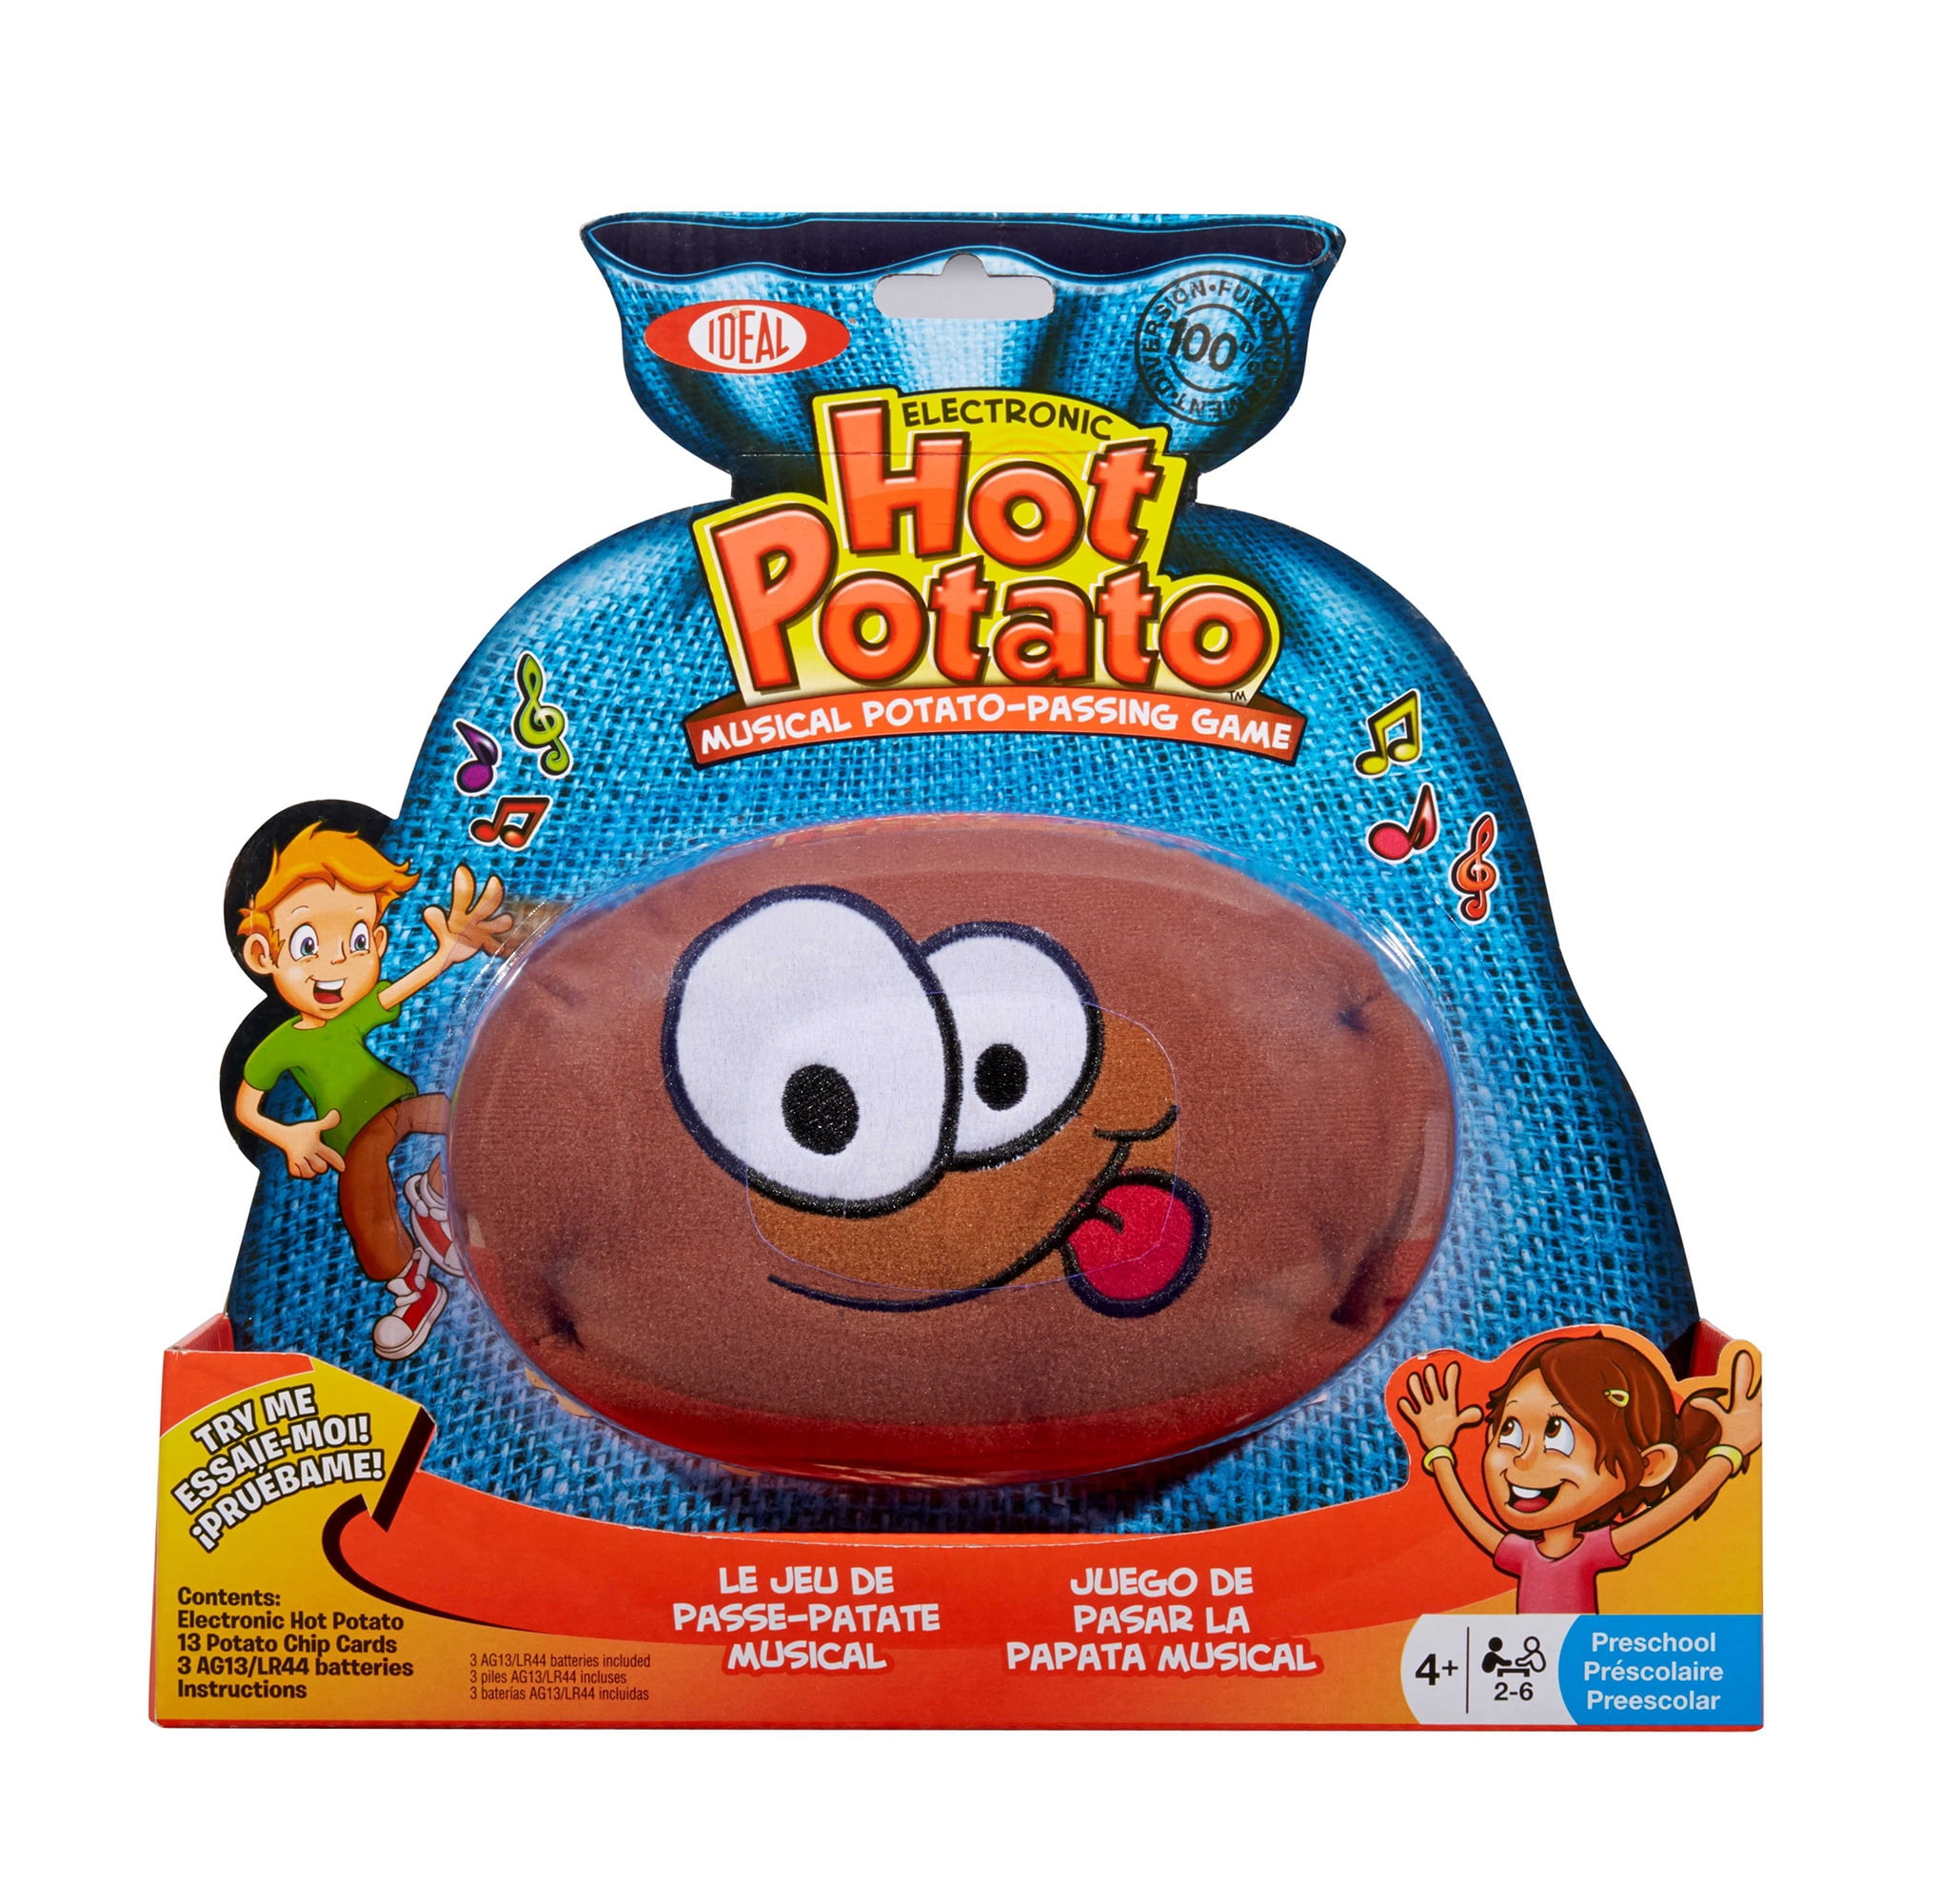 Ideal Hot Potato Electronic Musical Passing Kids Party Game, Don’t Get  Caught With the Spud When the Music Stops! Ages 4+, 2-6 Players